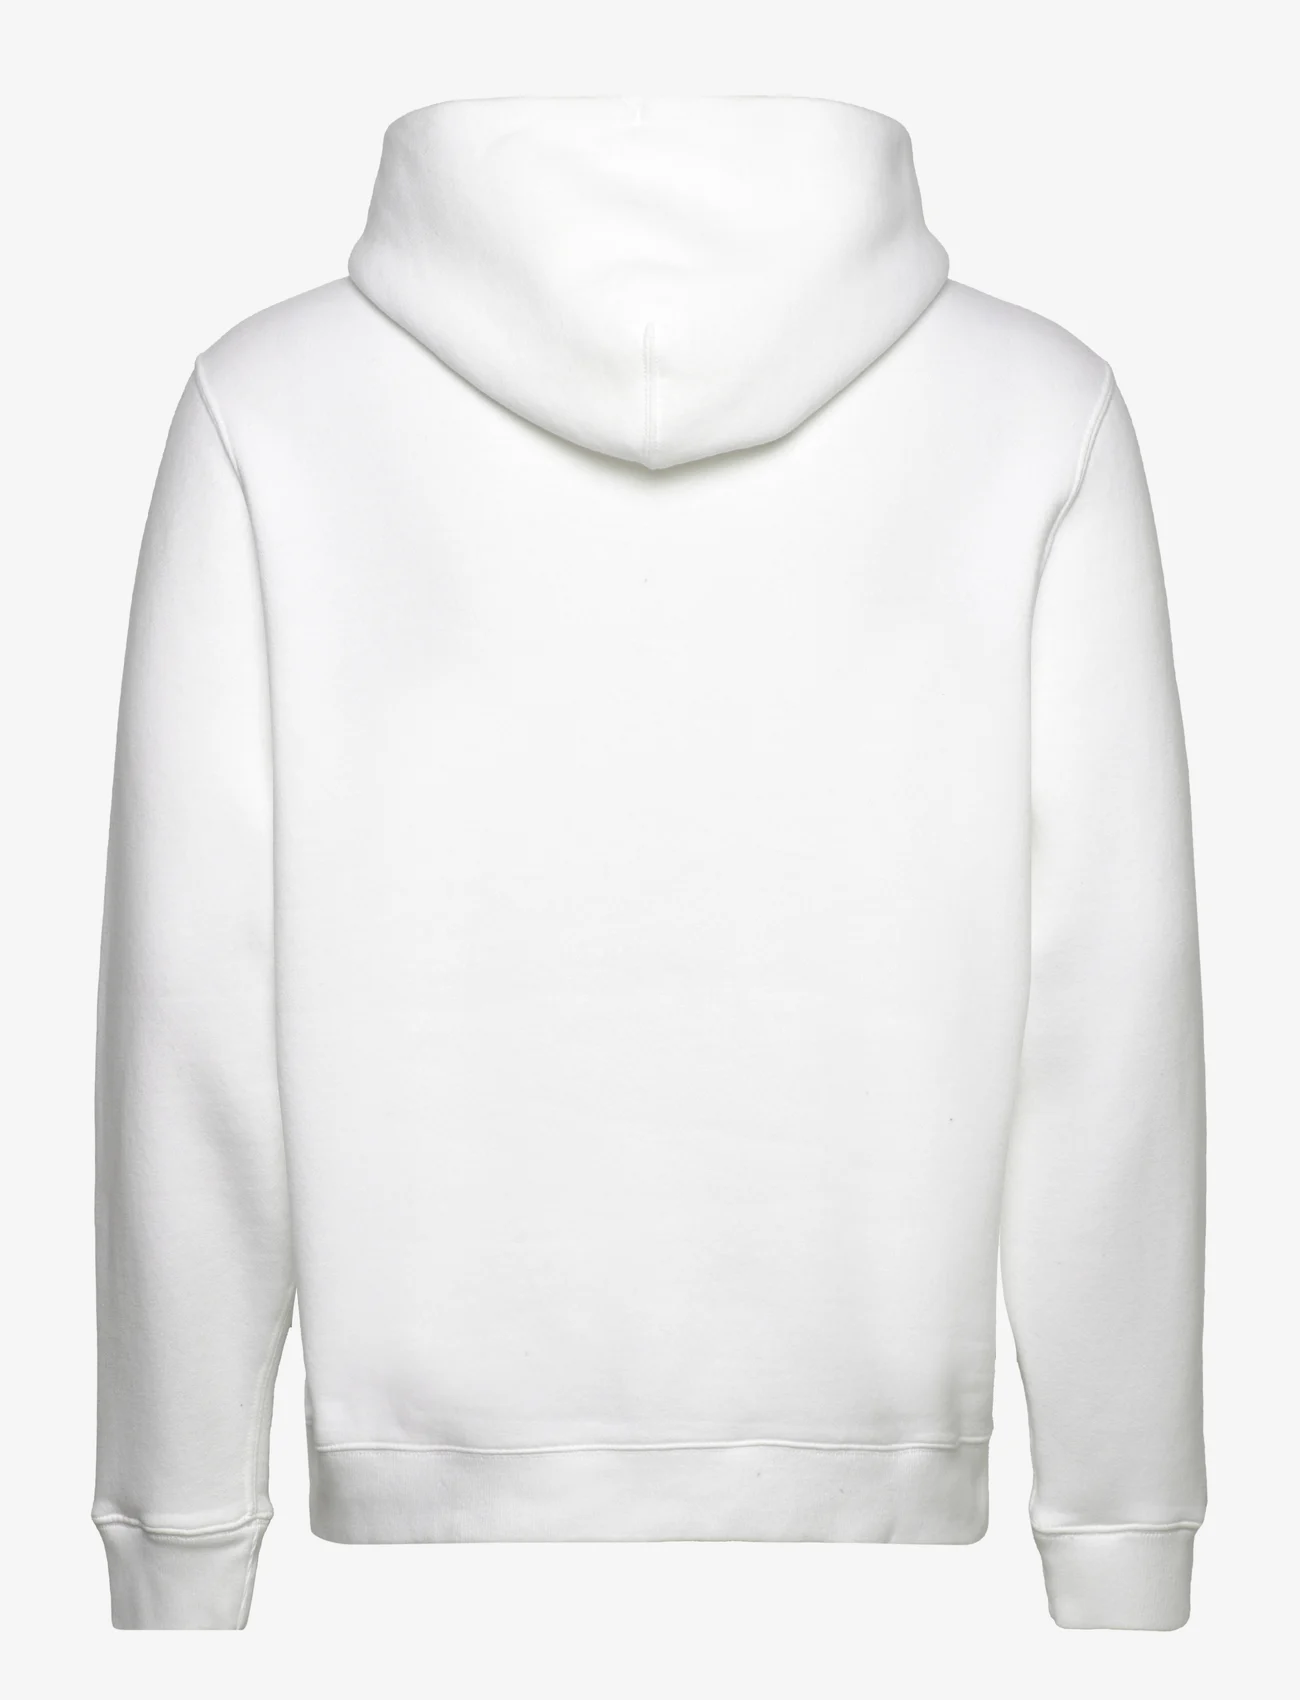 Abercrombie & Fitch - ANF MENS SWEATSHIRTS - hættetrøjer - white - 1